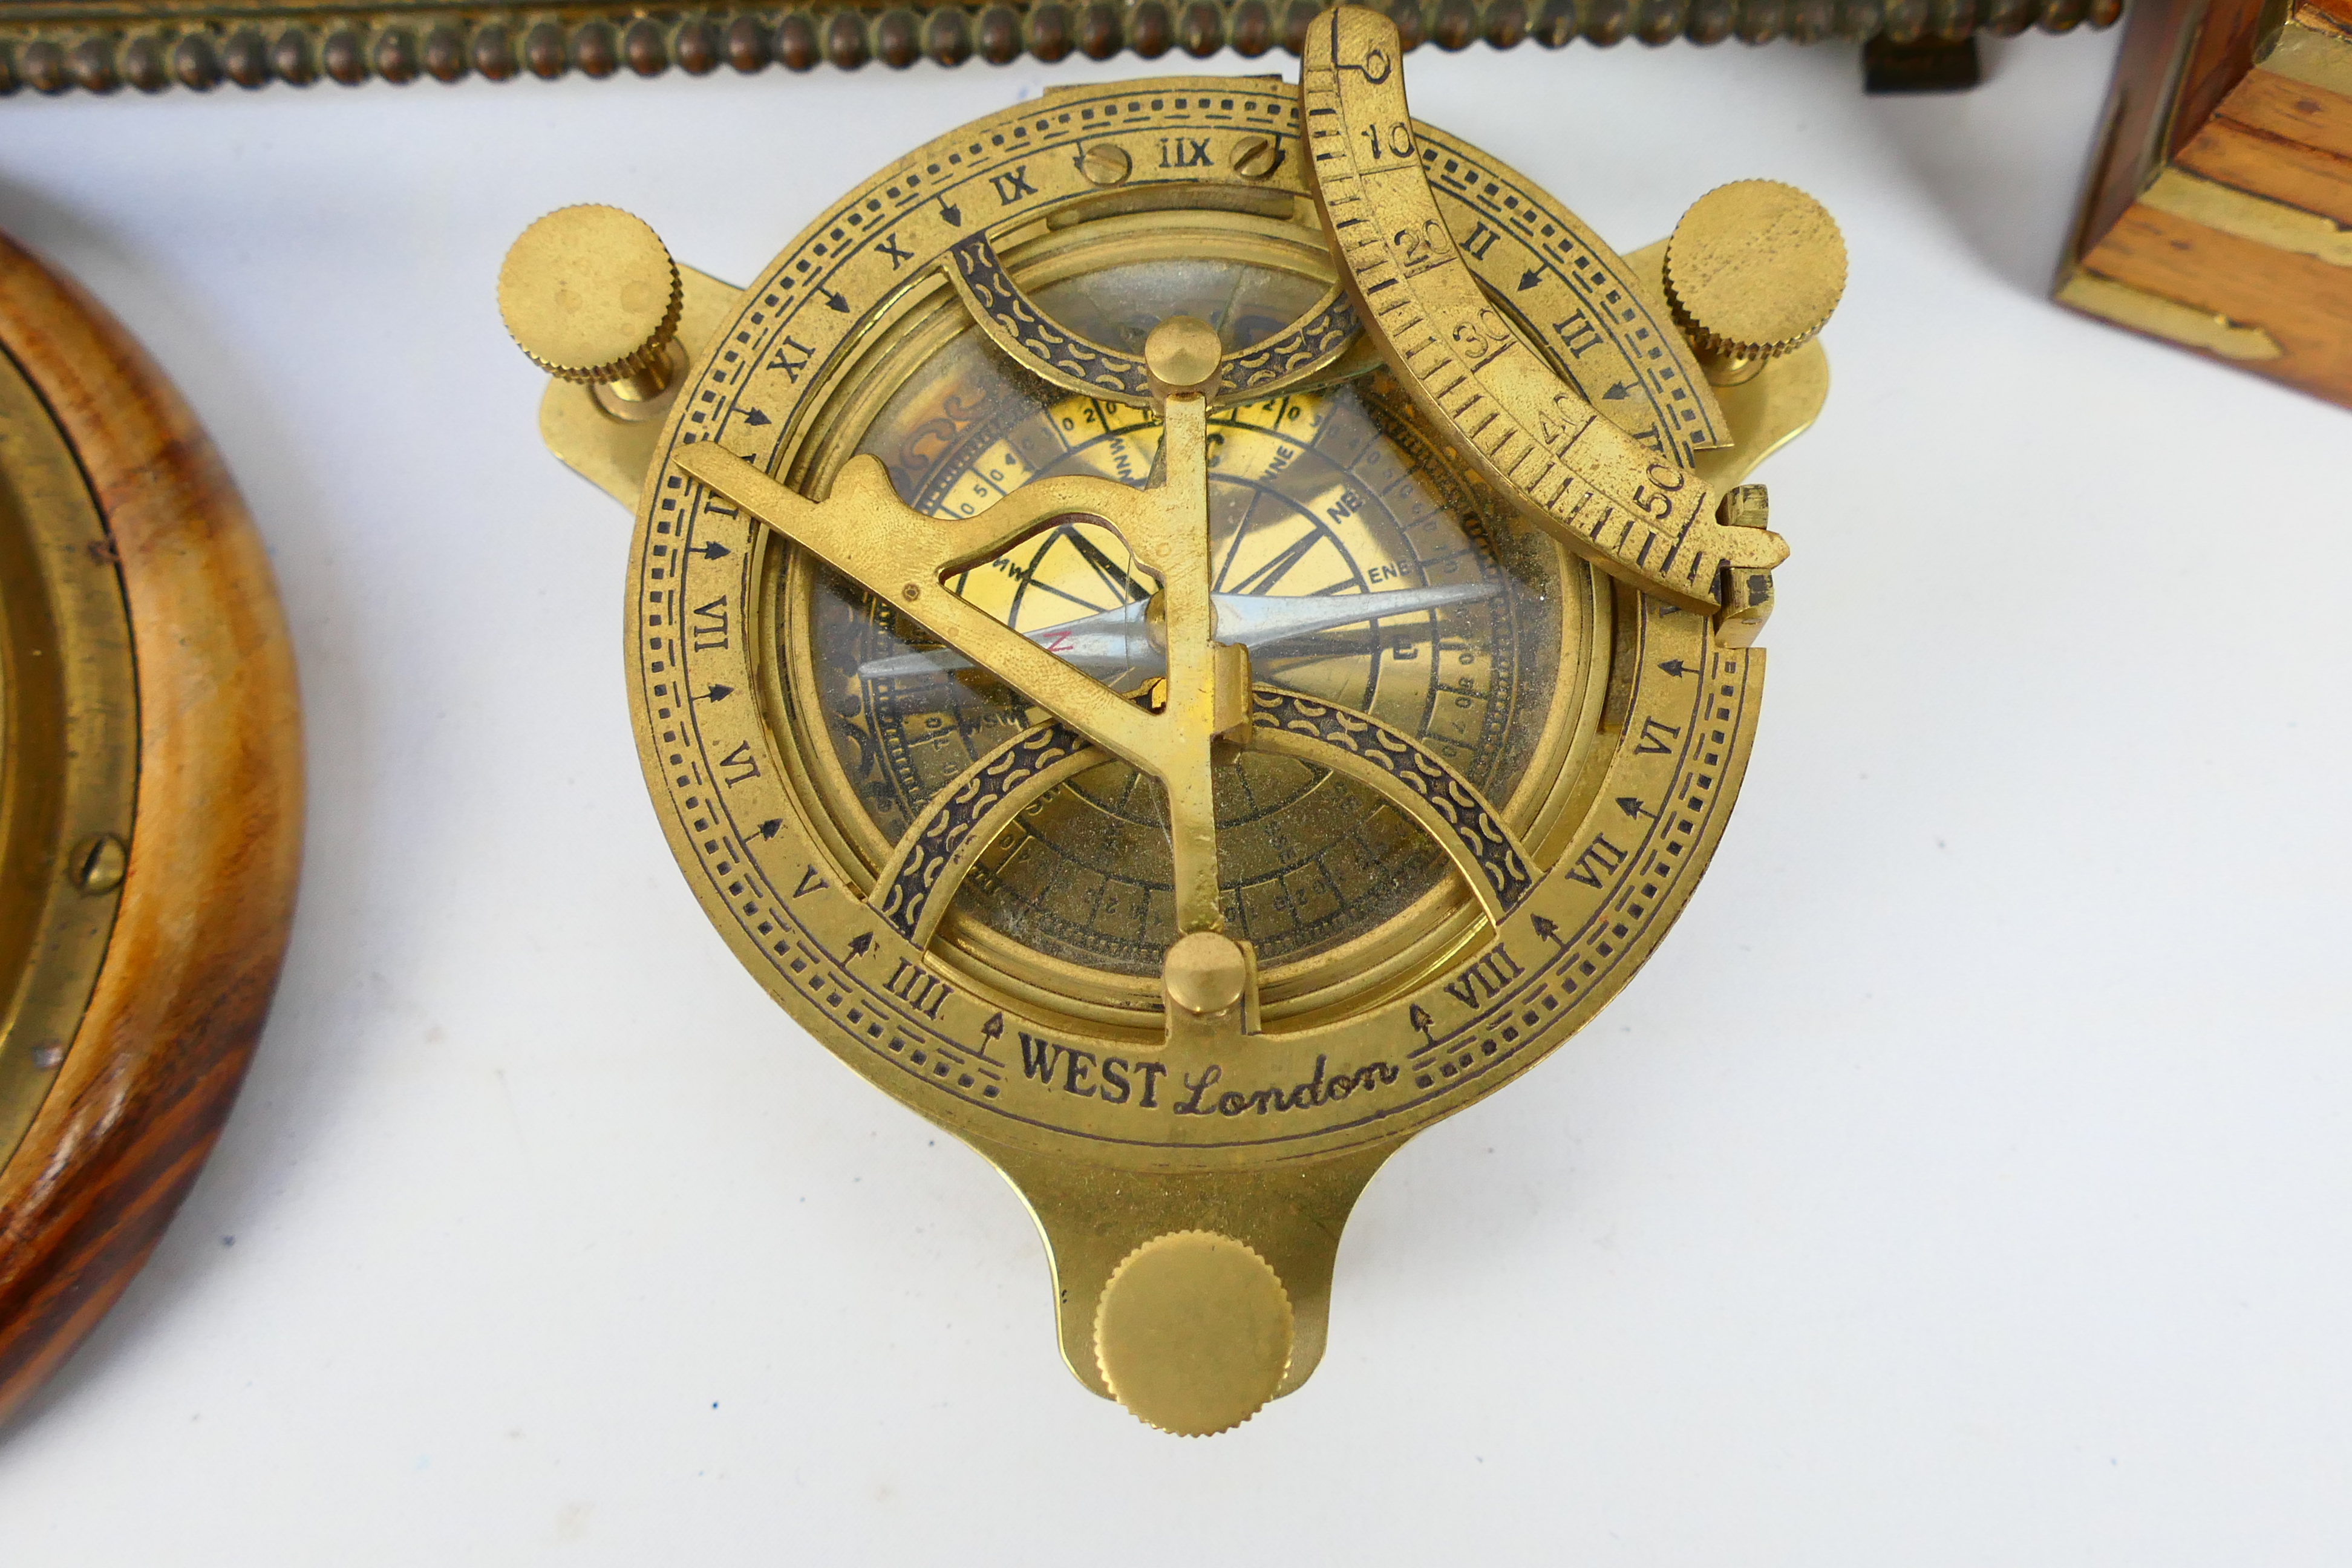 Lot to include a brass nautical sundial compass, contained in case, - Image 4 of 7